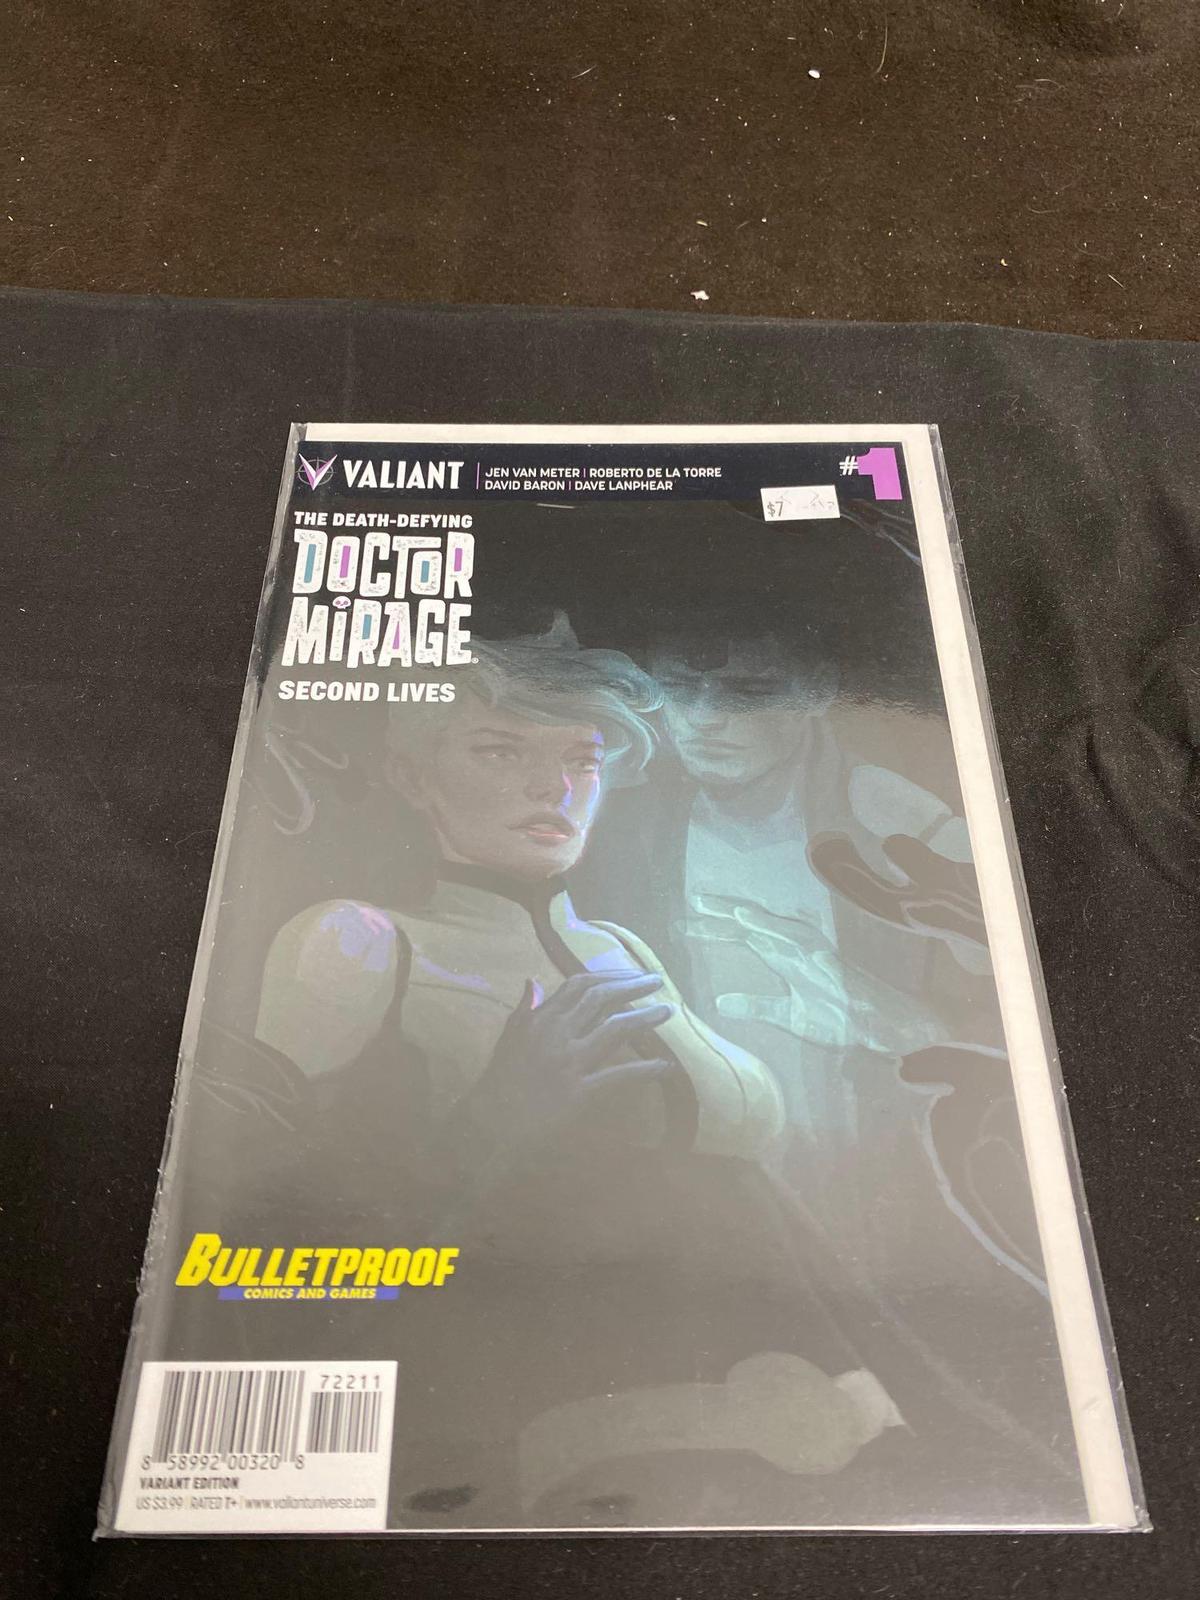 The Death-Defying Doctor Mirage #1 Comic Book from Amazing Collection